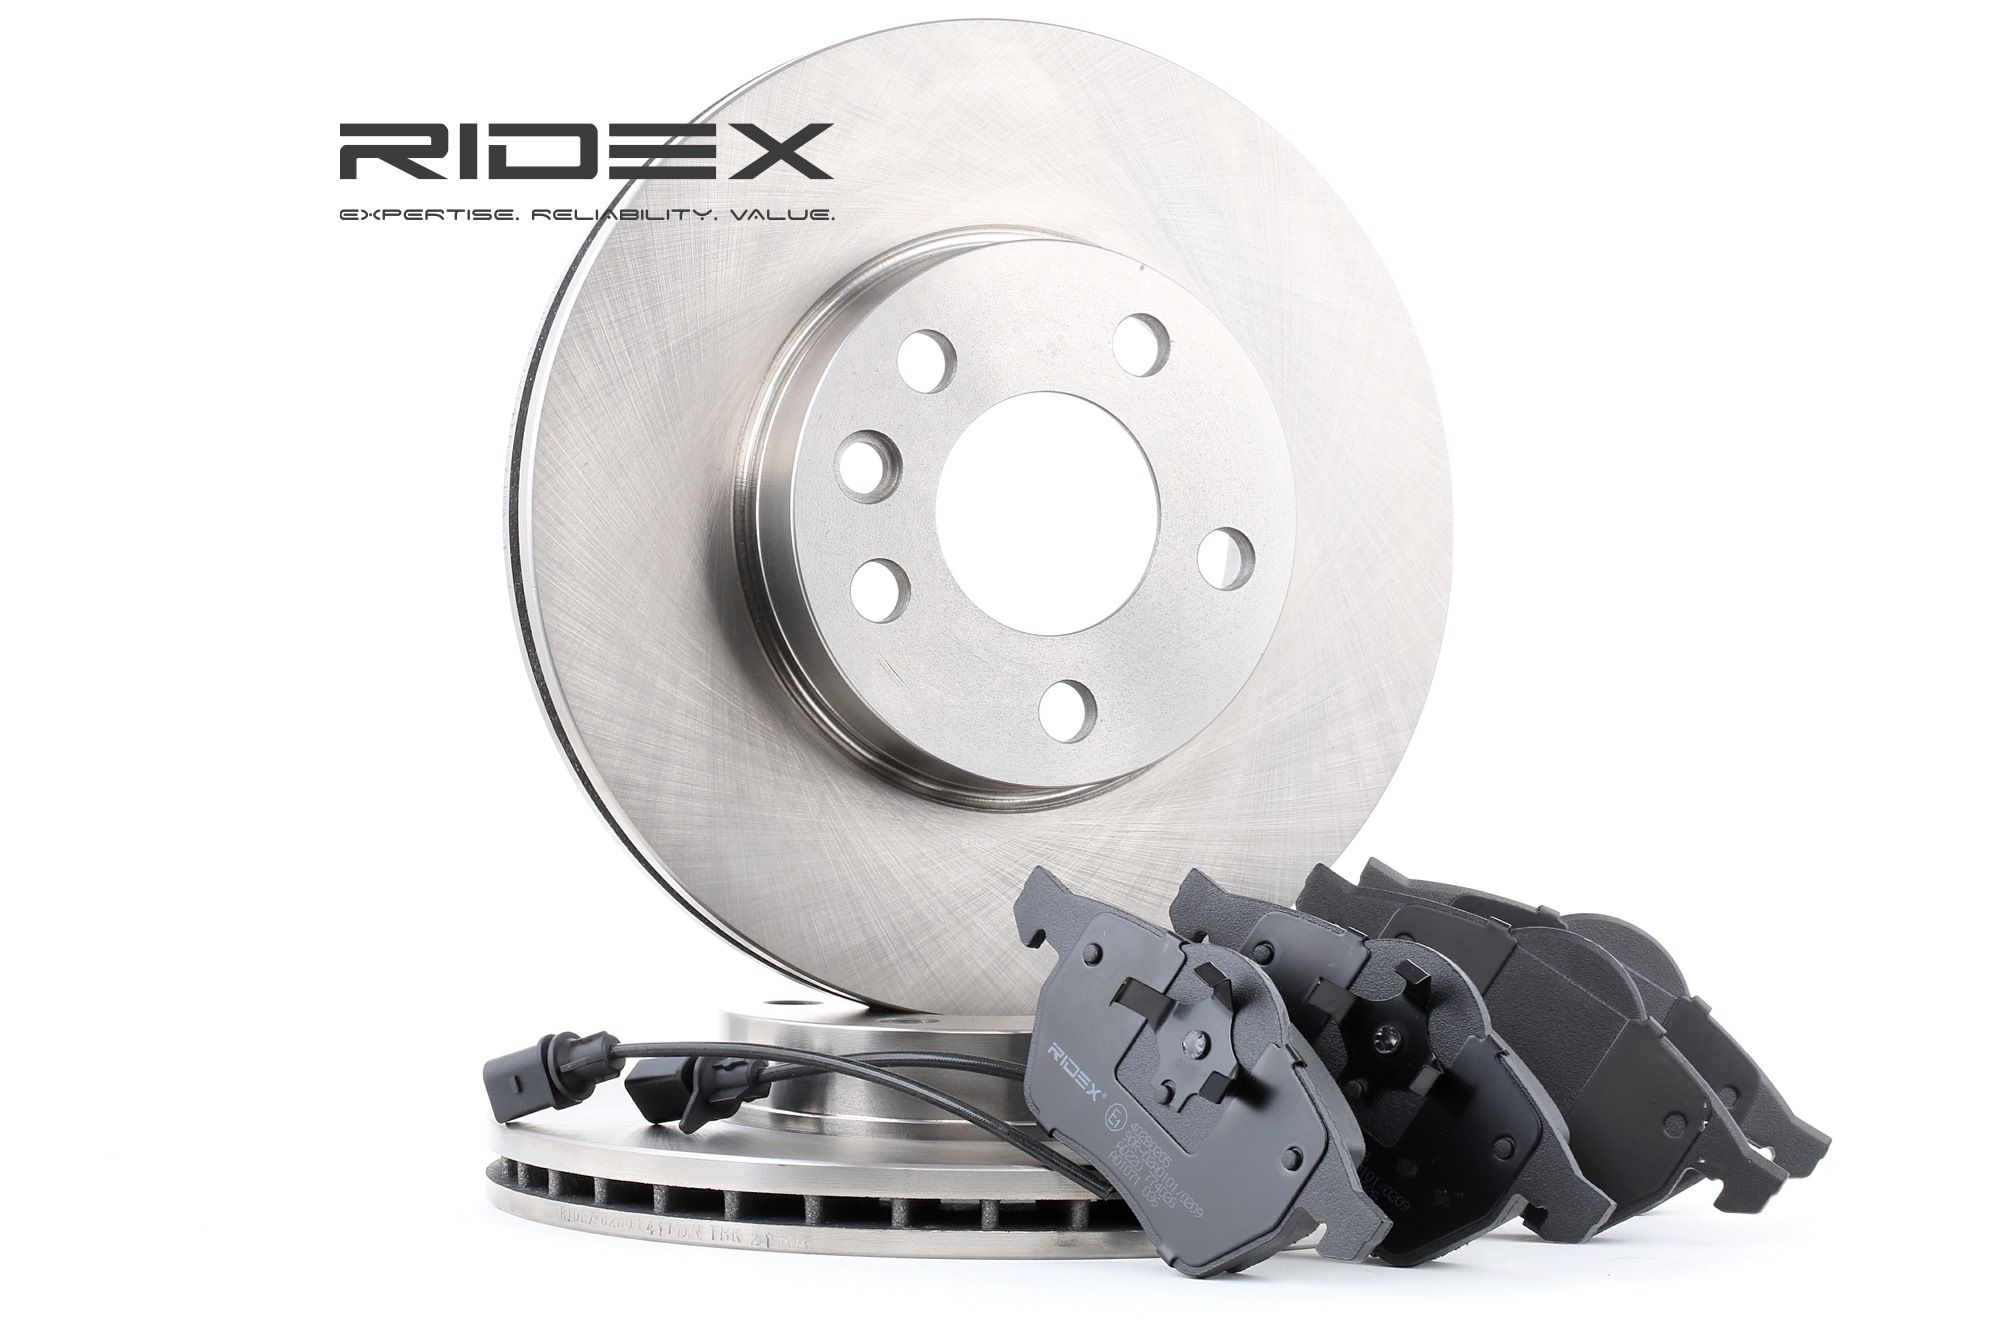 RIDEX 3405B0026 Brake discs and pads set Front Axle, Vented, with integrated wear sensor